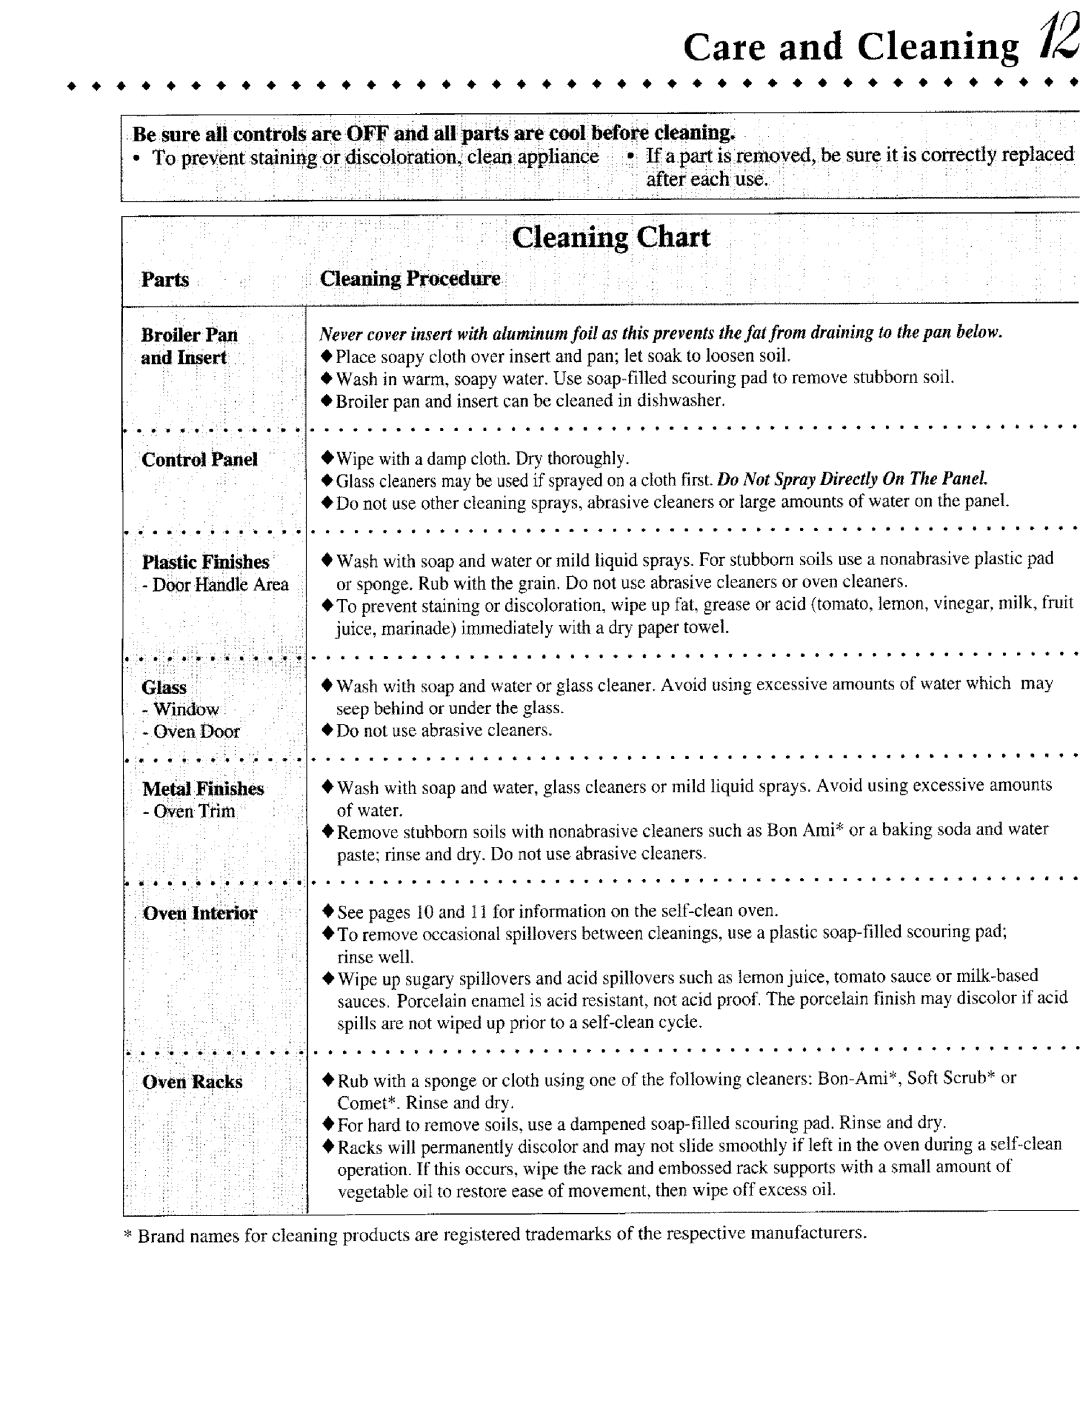 Jenn-Air JIVR /8530 warranty Care and Cleaning, Cleaning Procedure, Cleaning Chart 